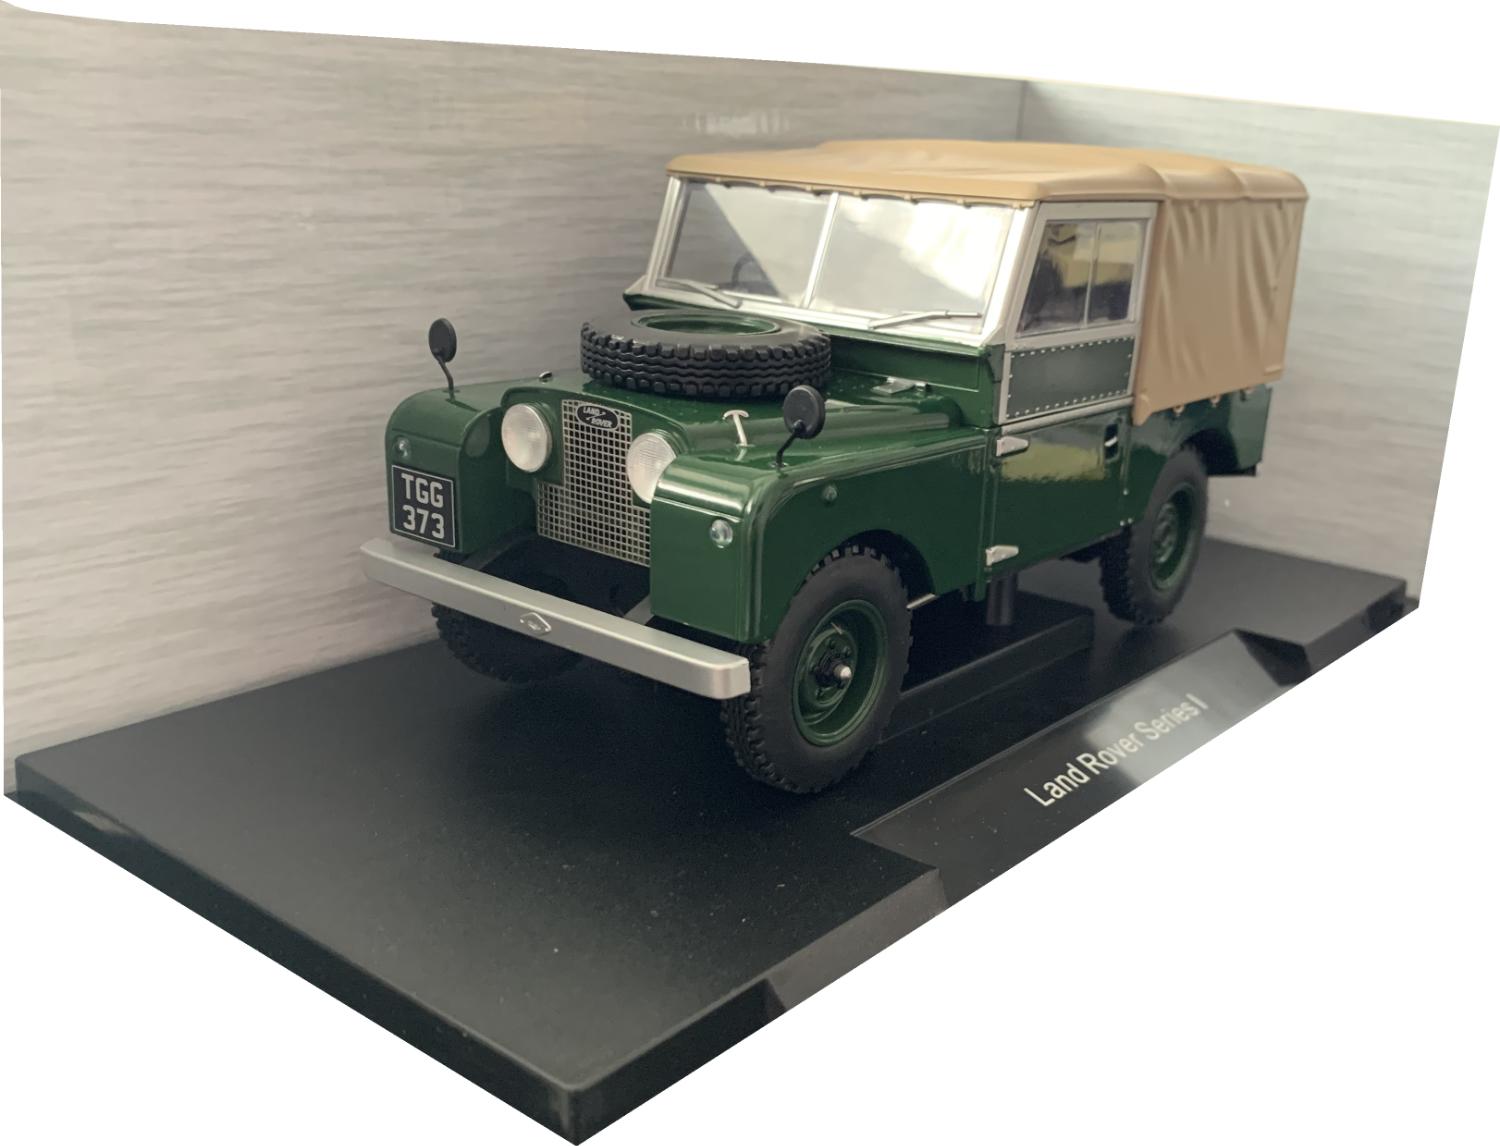 Land Rover Series 1 Closed in dark green 1:18 scale model from Motor Car Group